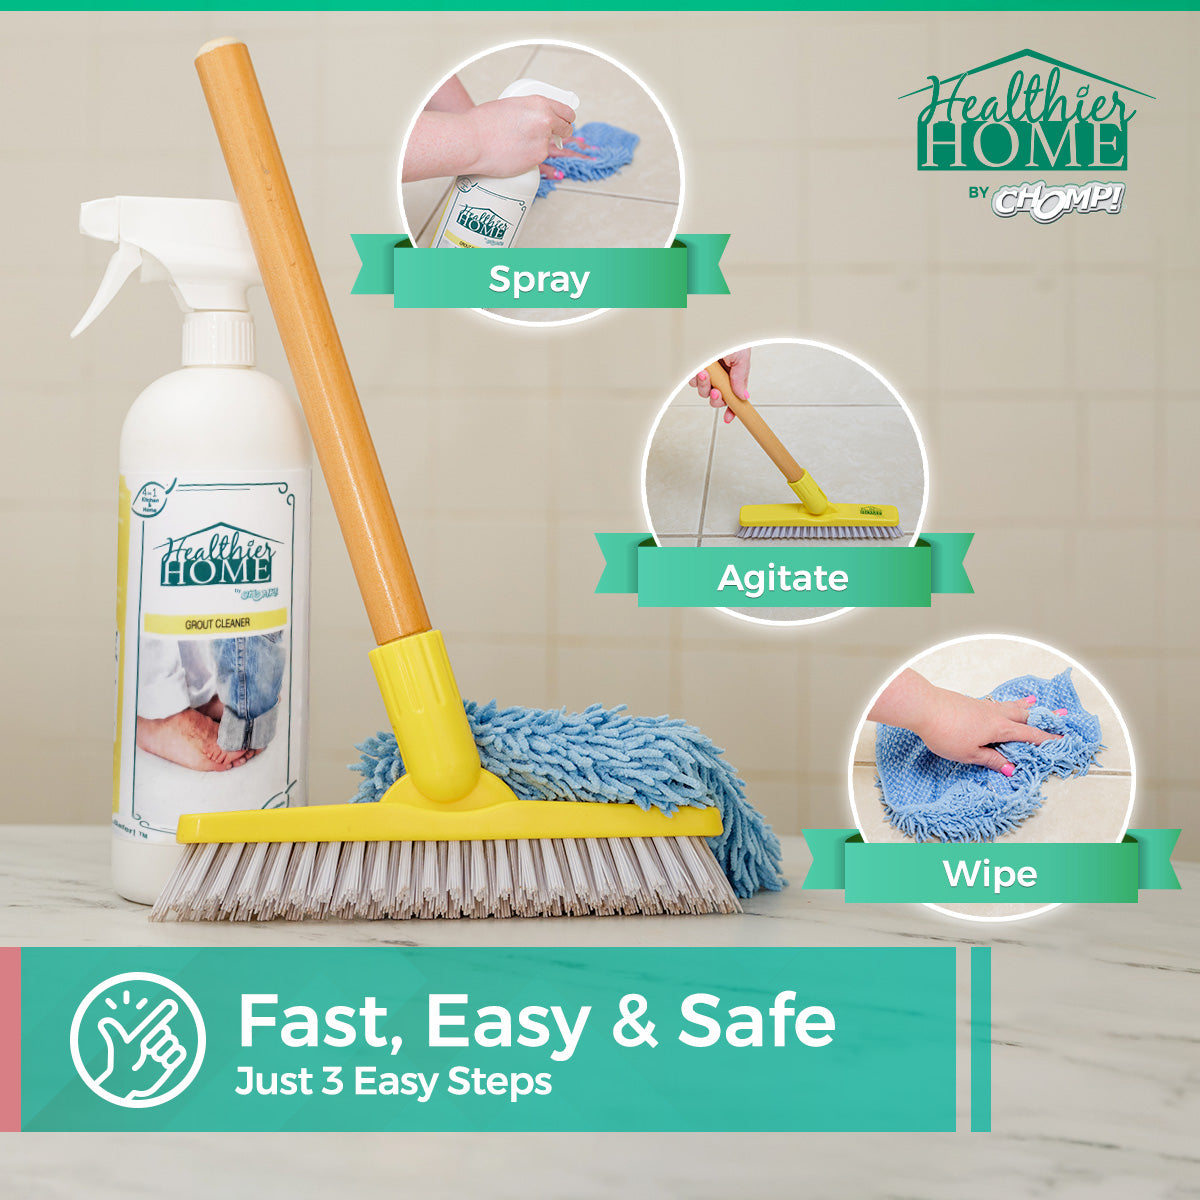 Grout Cleaner Bundle